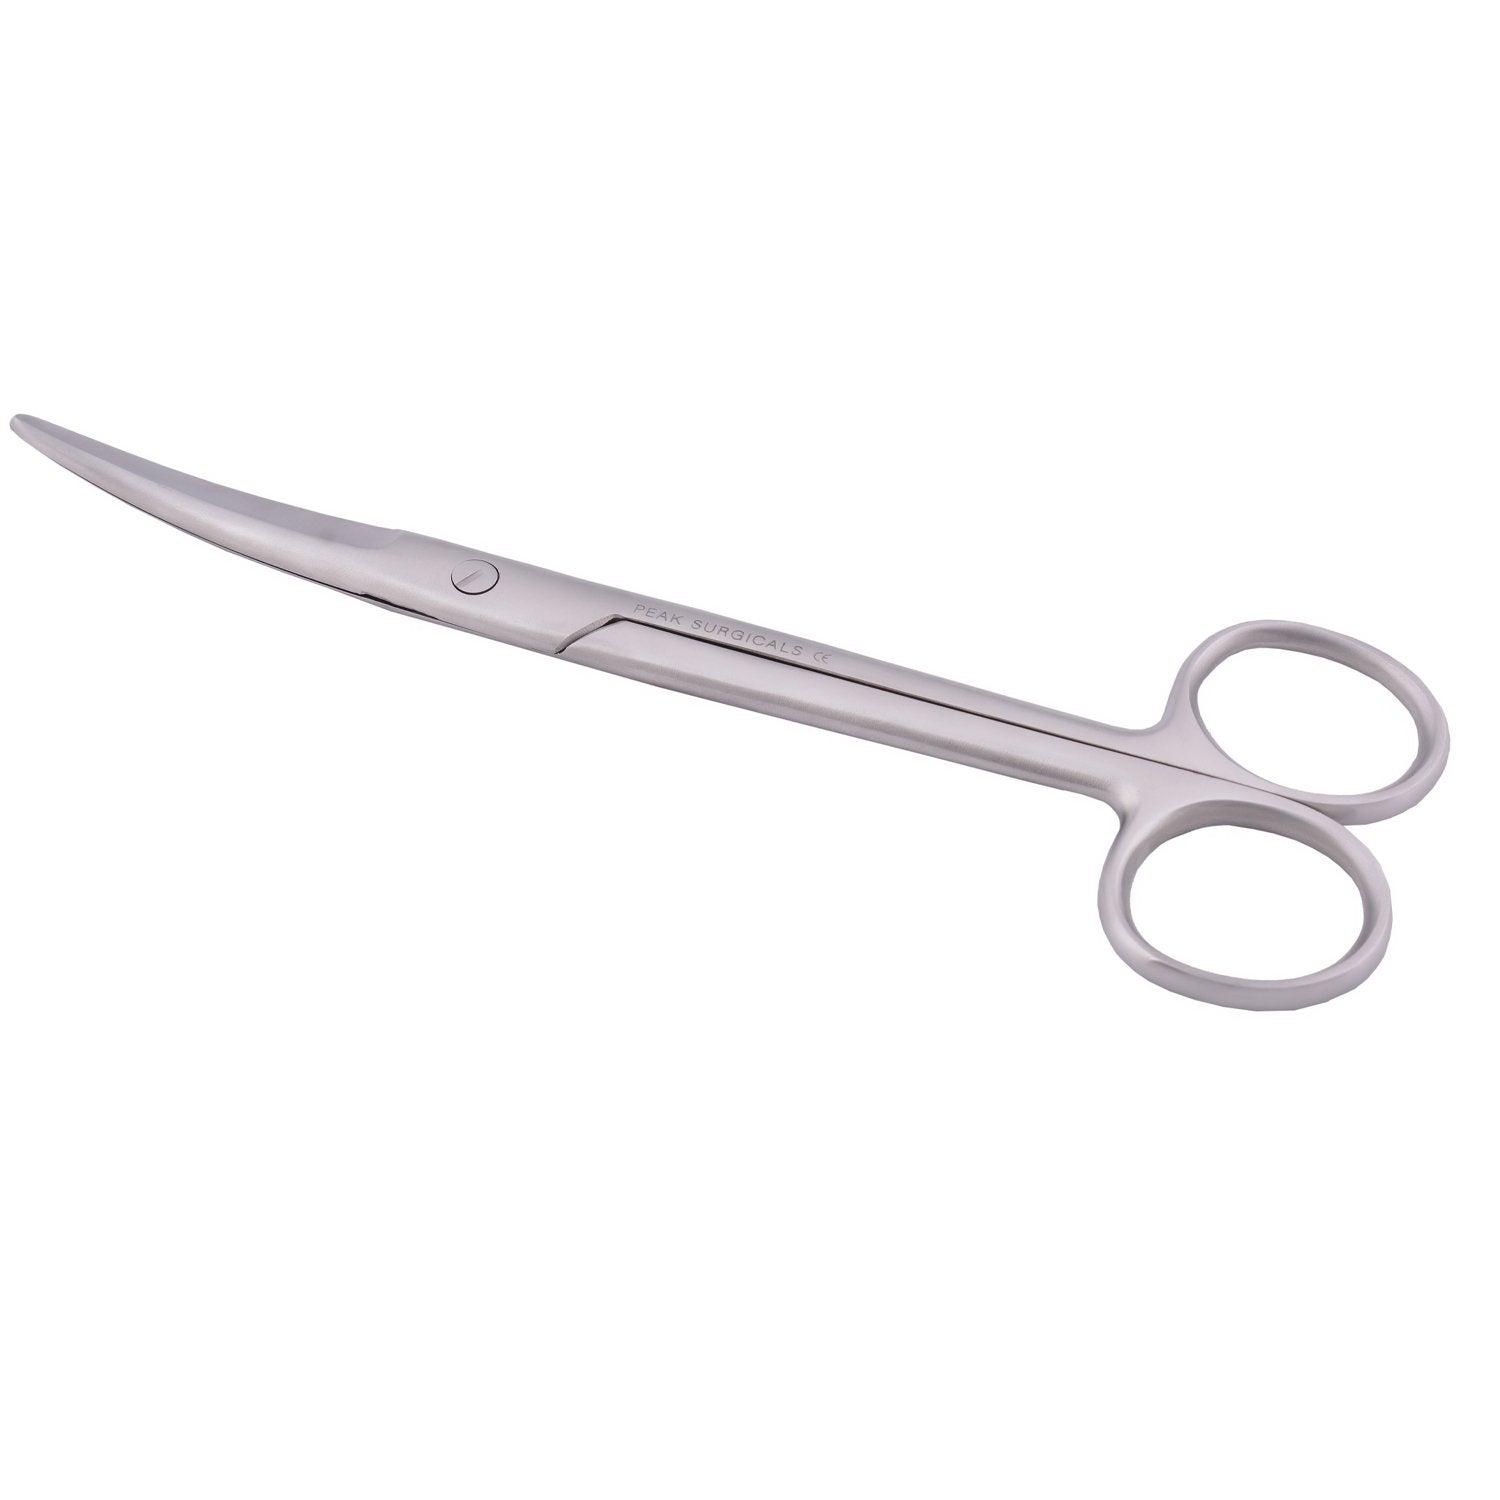 Mayo-sims Dissecting Scissors